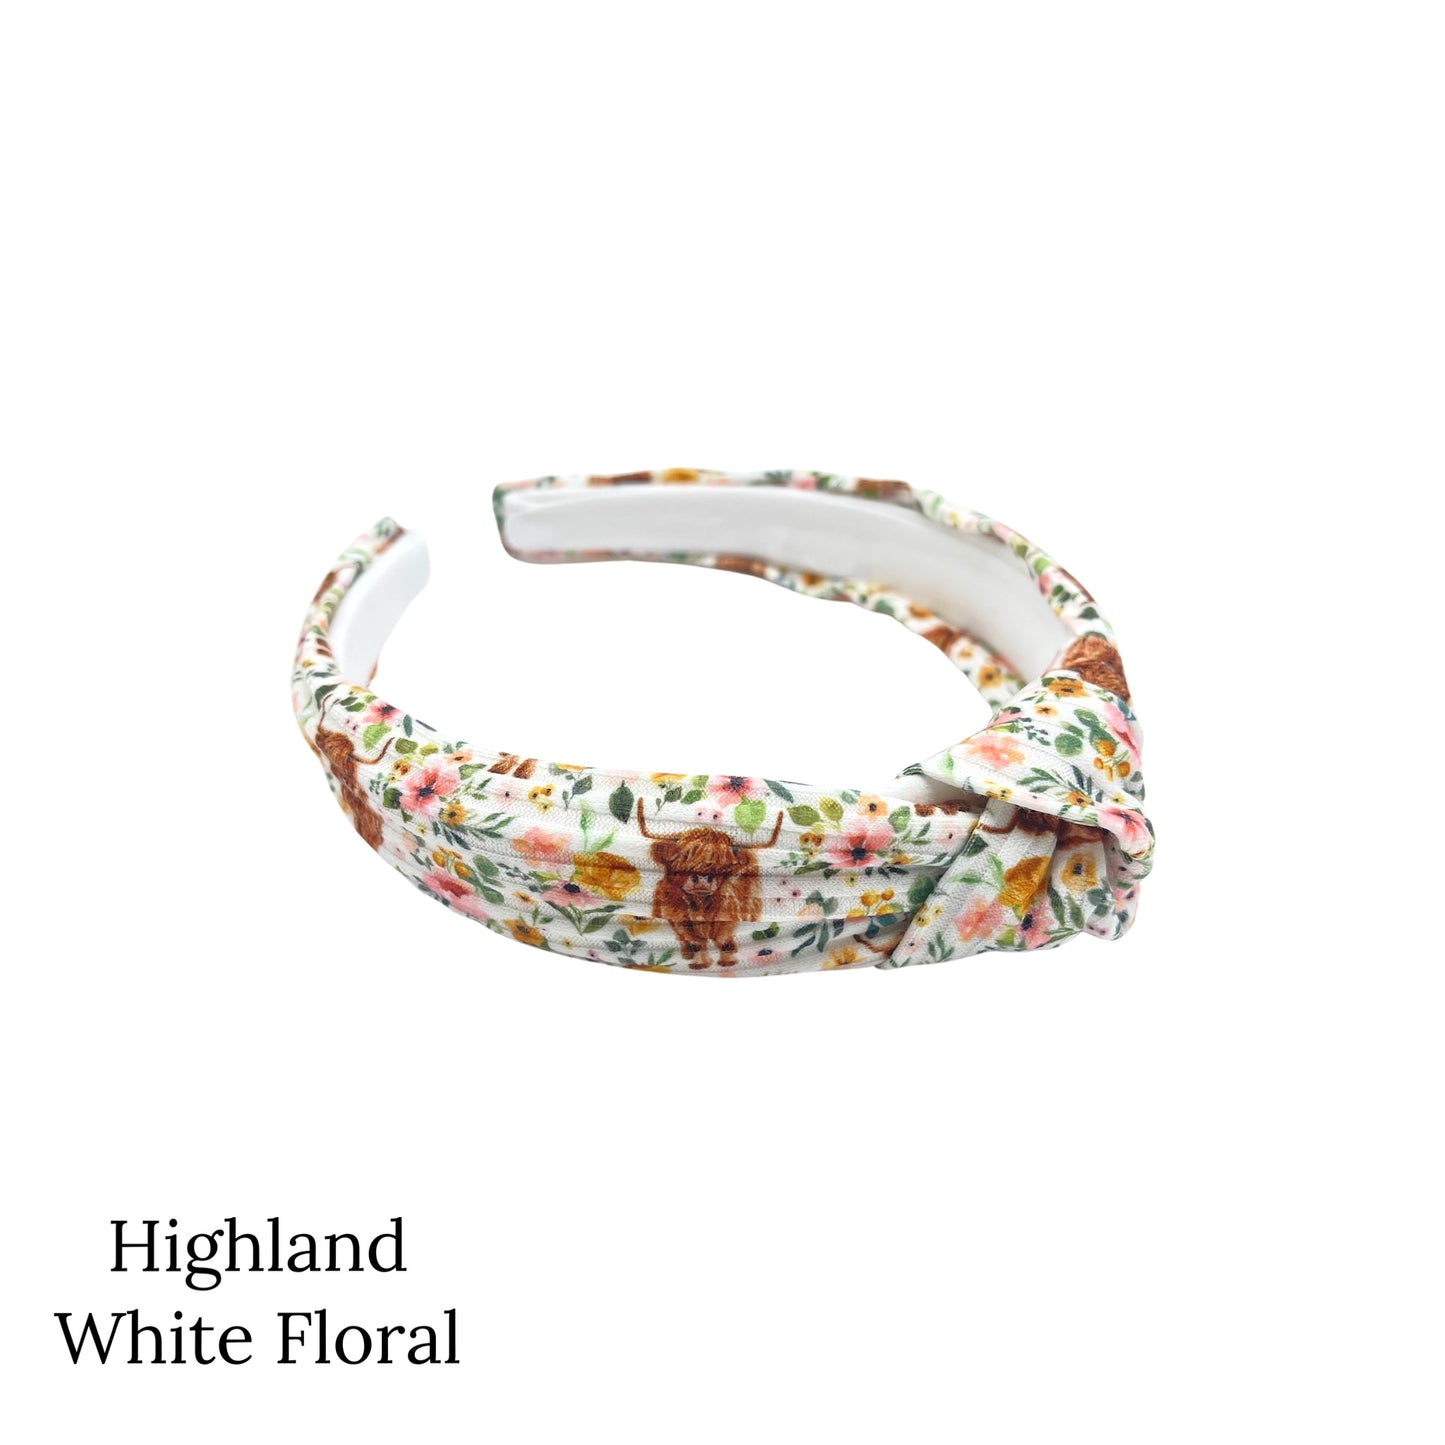 Farm animals knotted headbands. Highland white floral patterned headband. 